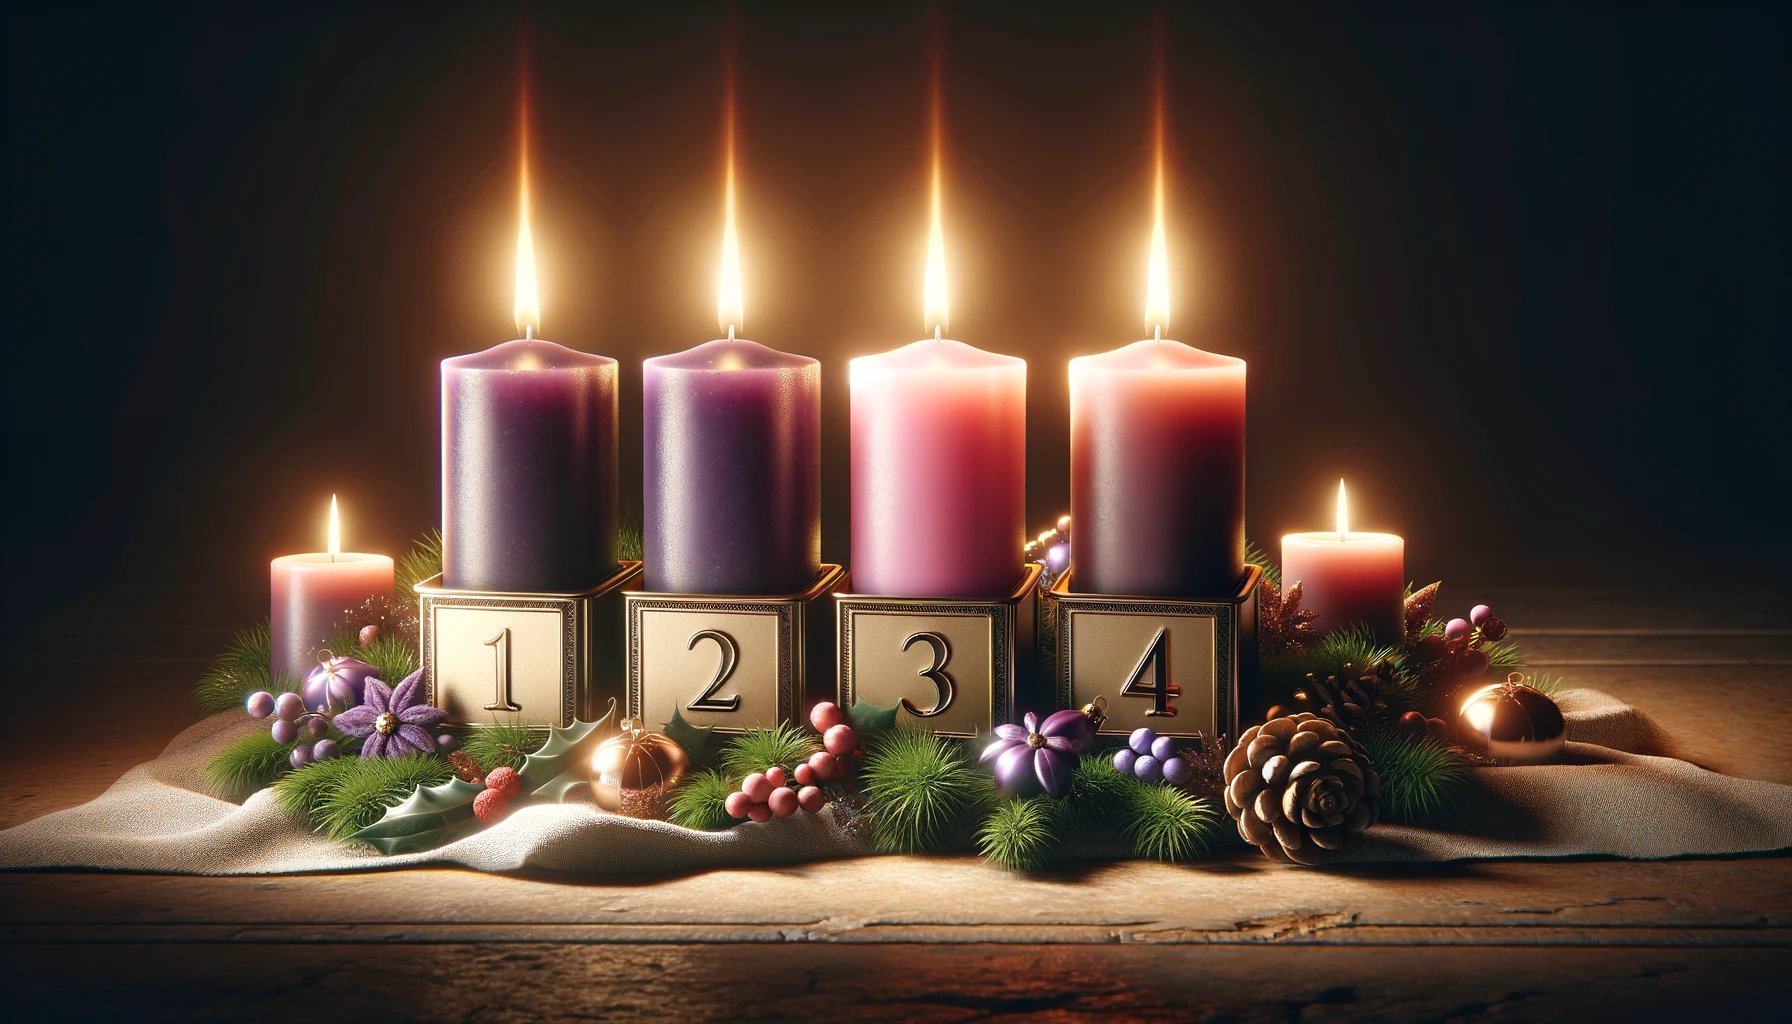 What Are The 4 Themes For Advent?